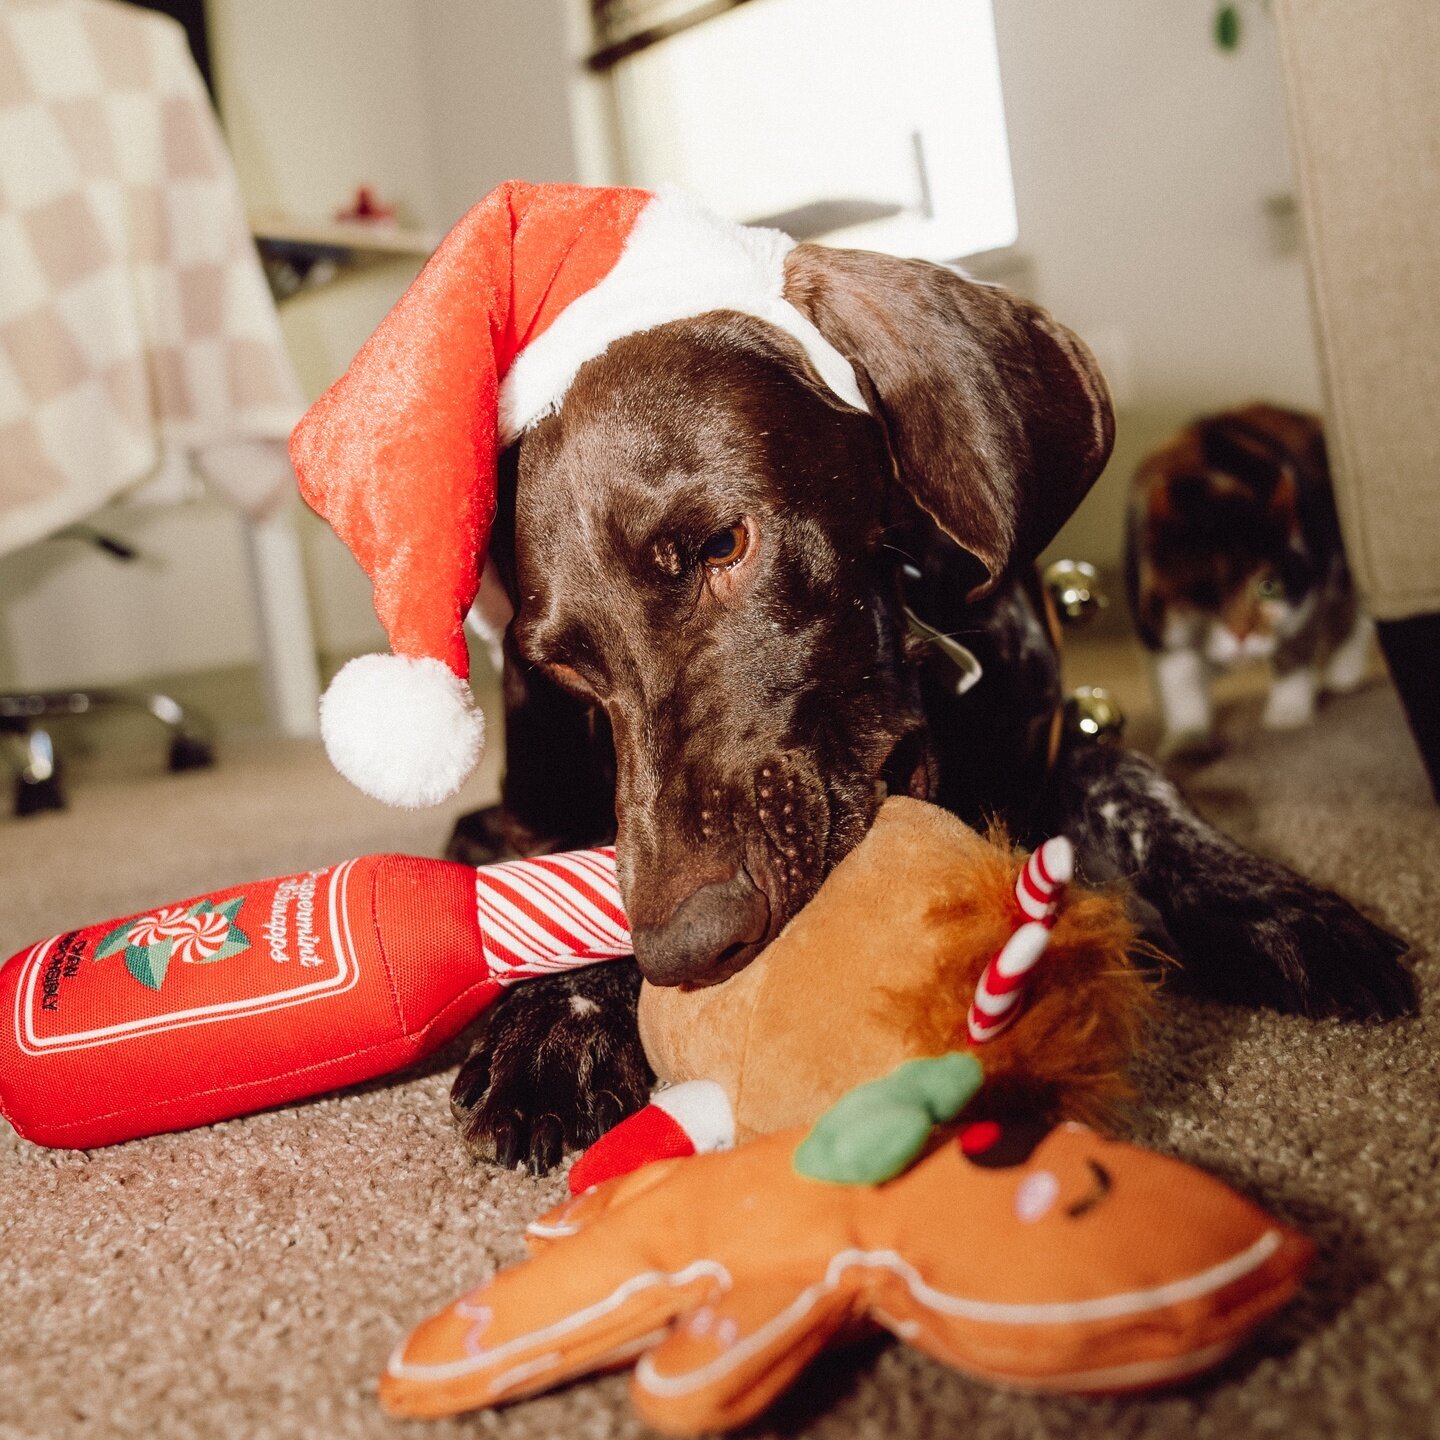 Here comes Santa Paws! Did you woof &amp; wish for Woof &amp; Whiskers under your tree? 🎁 This good boy did! Find the items on your pup's wish list only @heb
.
.
.
.
.
#WoofandWhiskers #HEB #TexasDogToys #pawliday